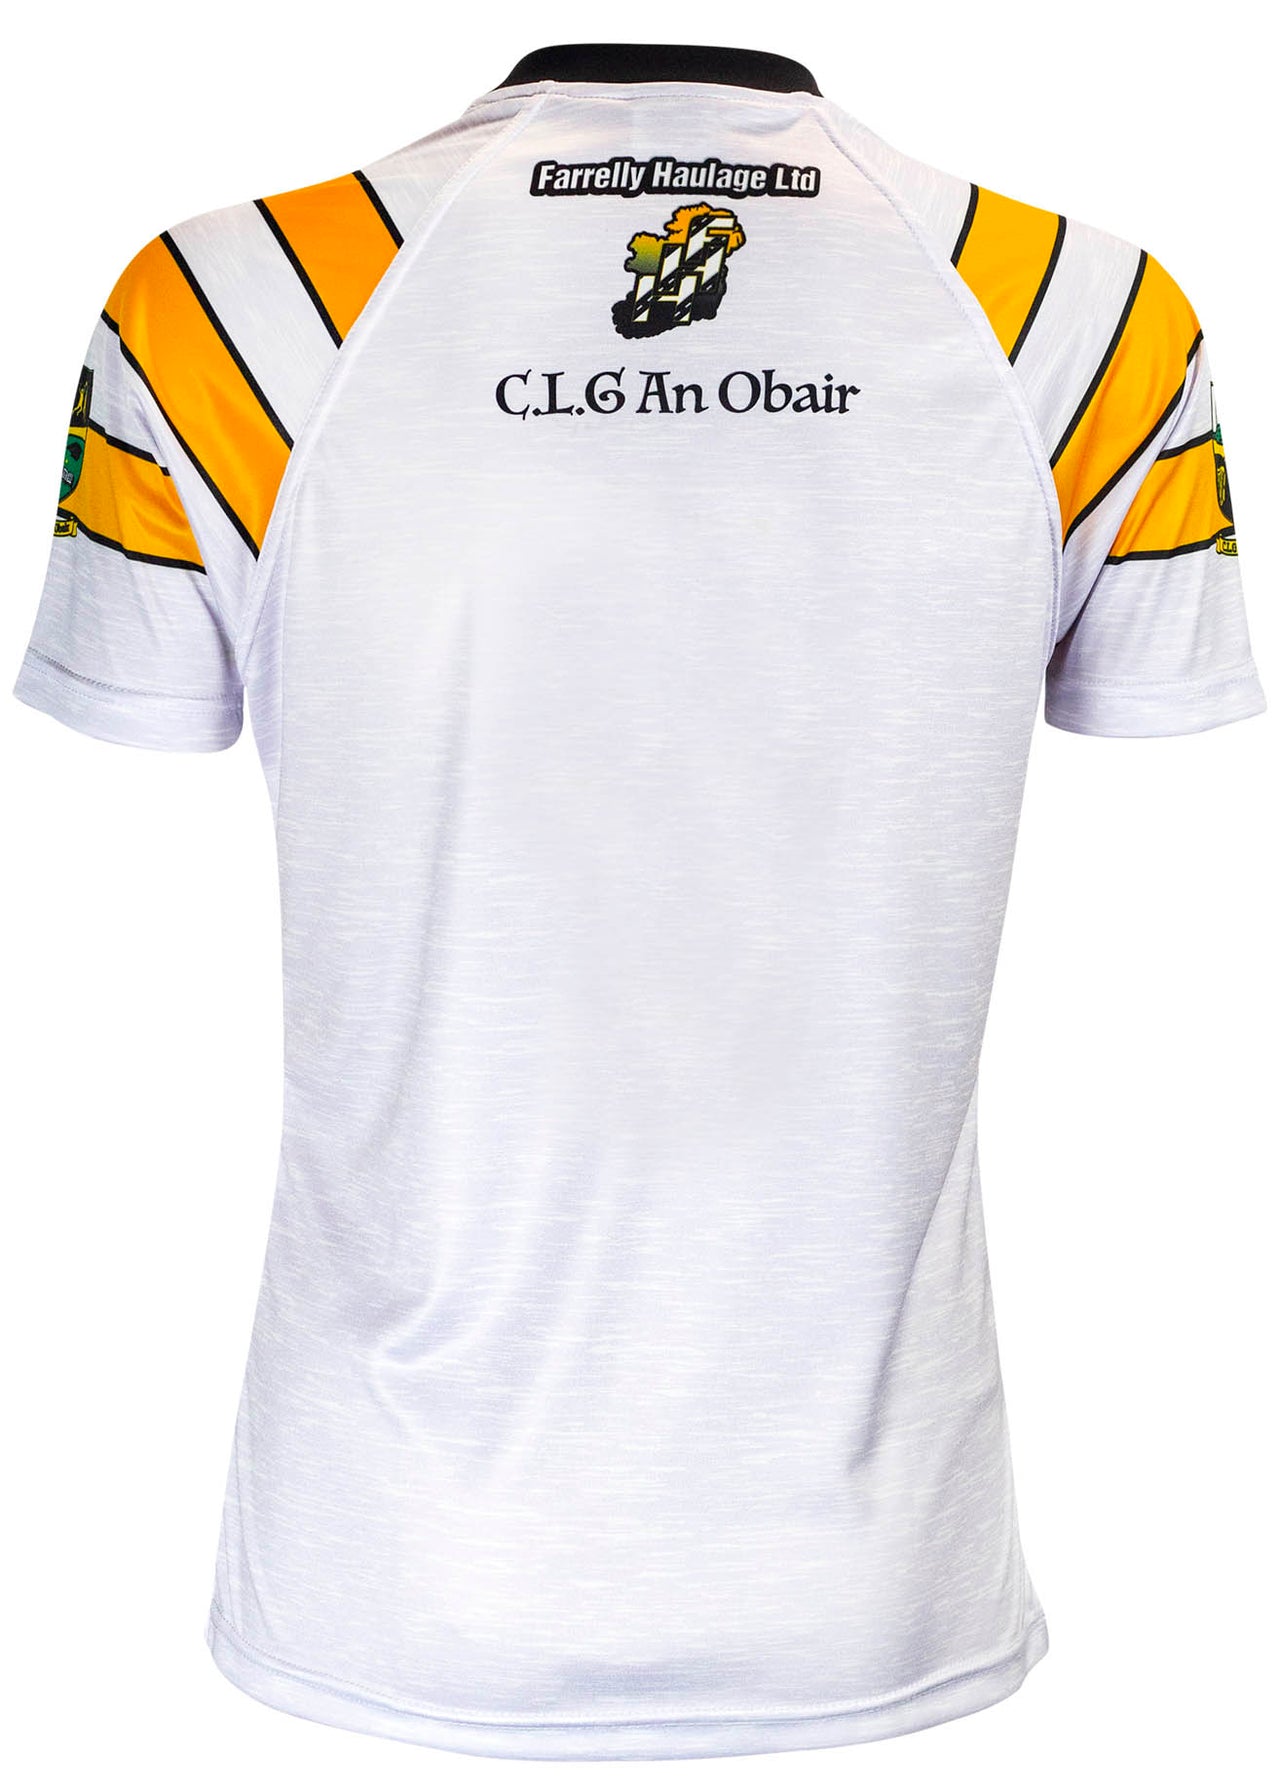 Nobber GAA Away Jersey Player Fit Adult